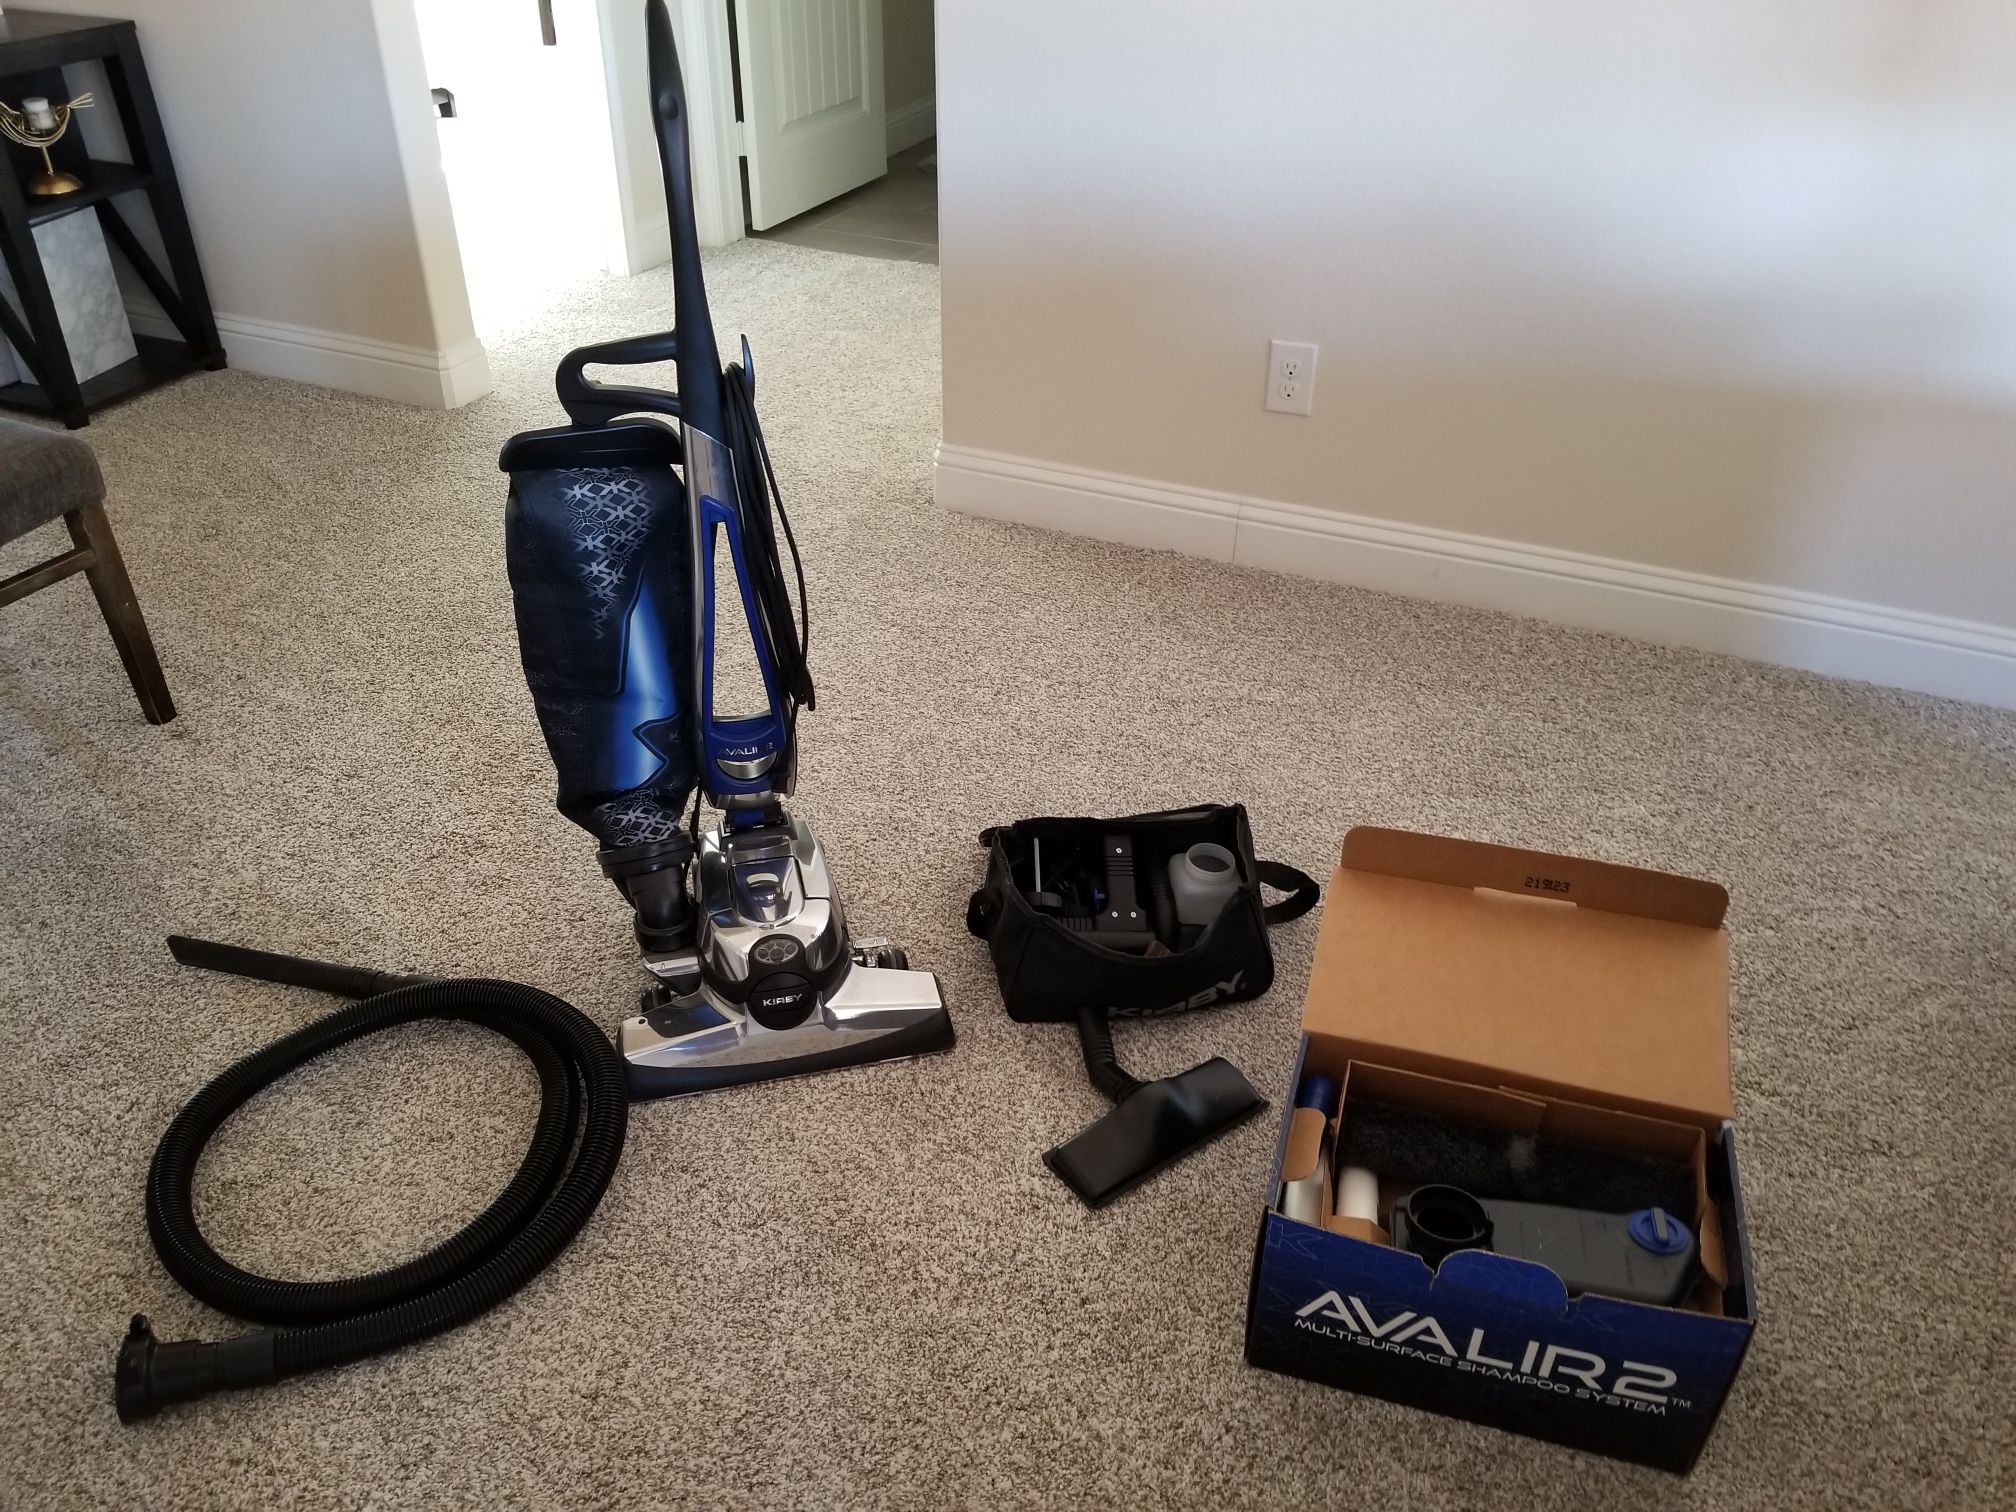  Kirby Avalir 2 Vacuum and Home Care System : Home & Kitchen